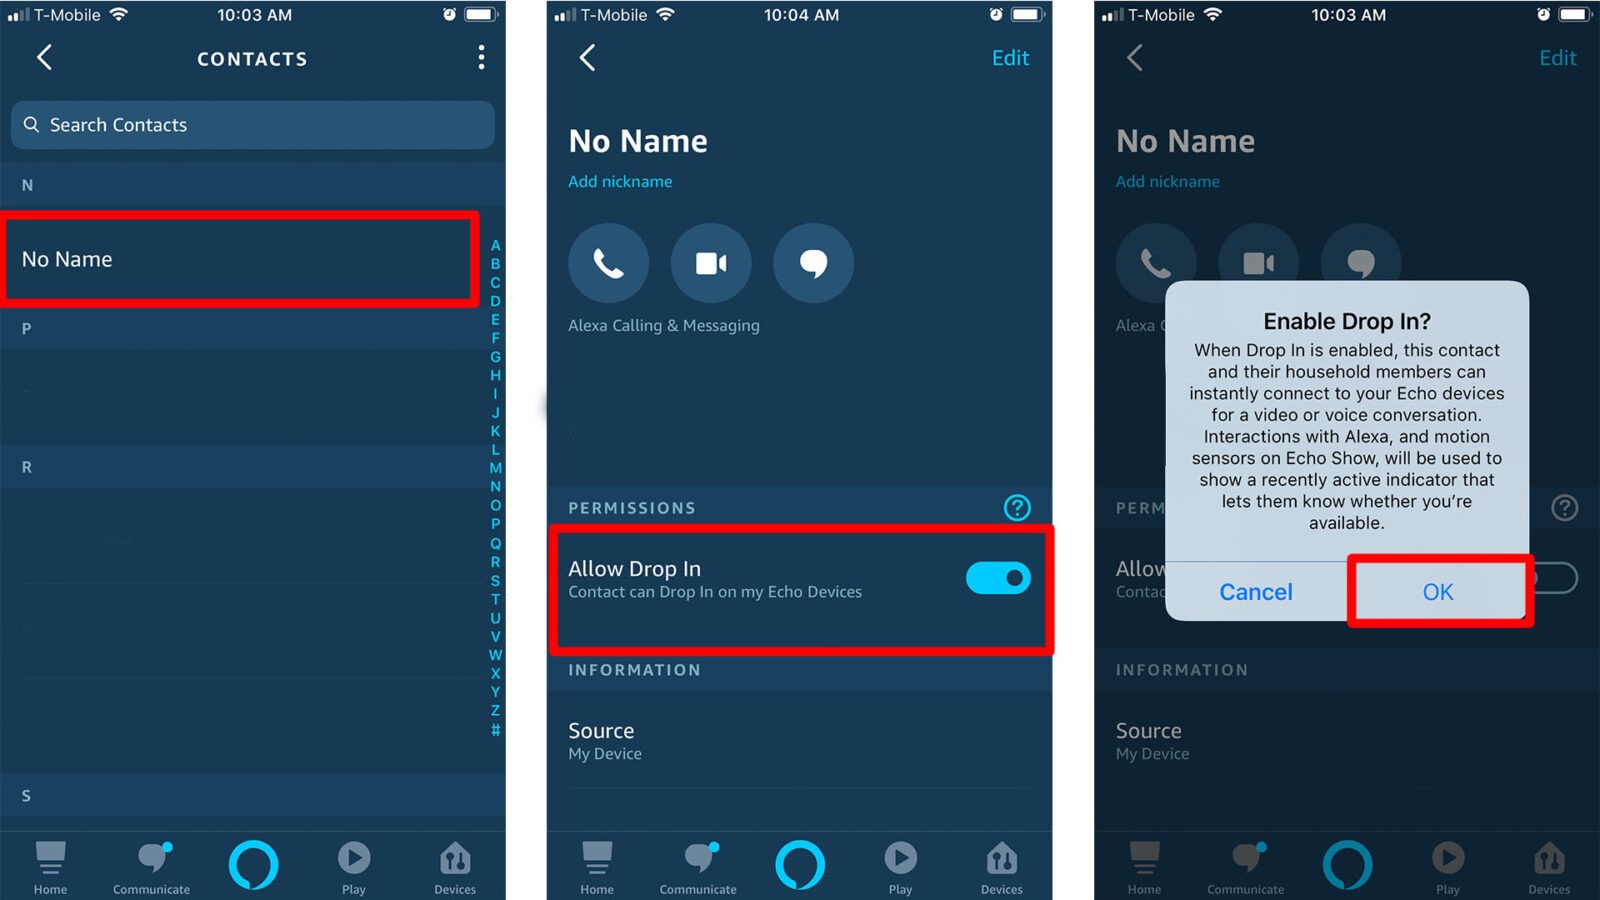 How to enable Alexa Drop In Other Contacts